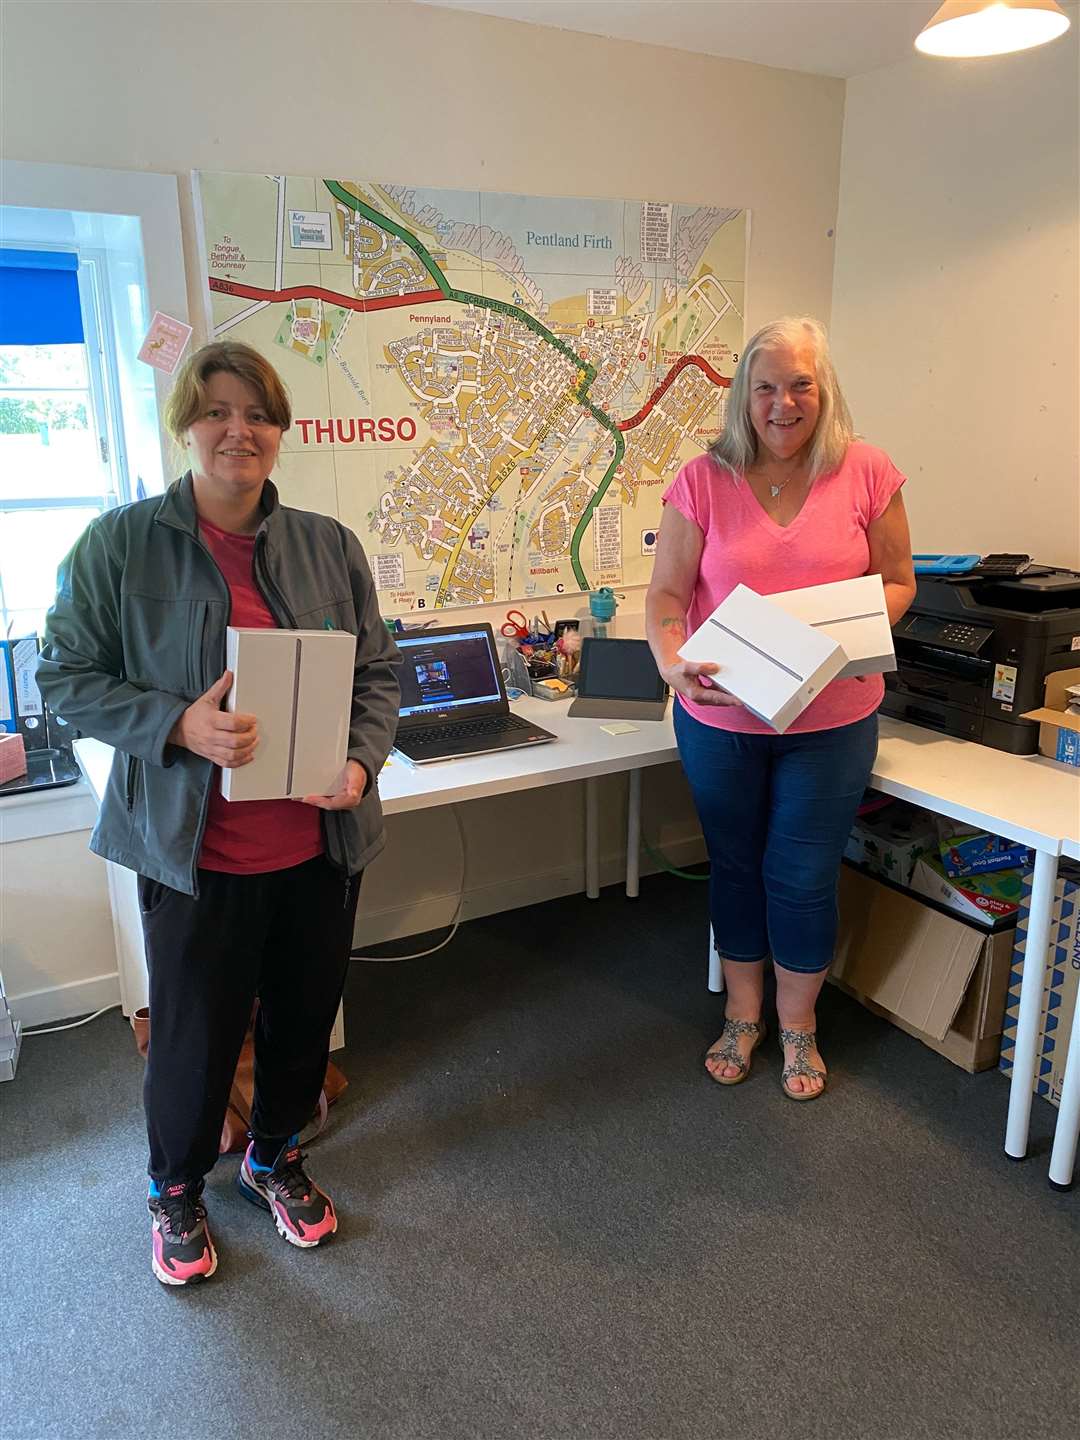 One of the project co-ordinators Ann Brock (left) and Thurso Community Development Trust chairperson Helen Allan are pictured here with some of the digital devices.